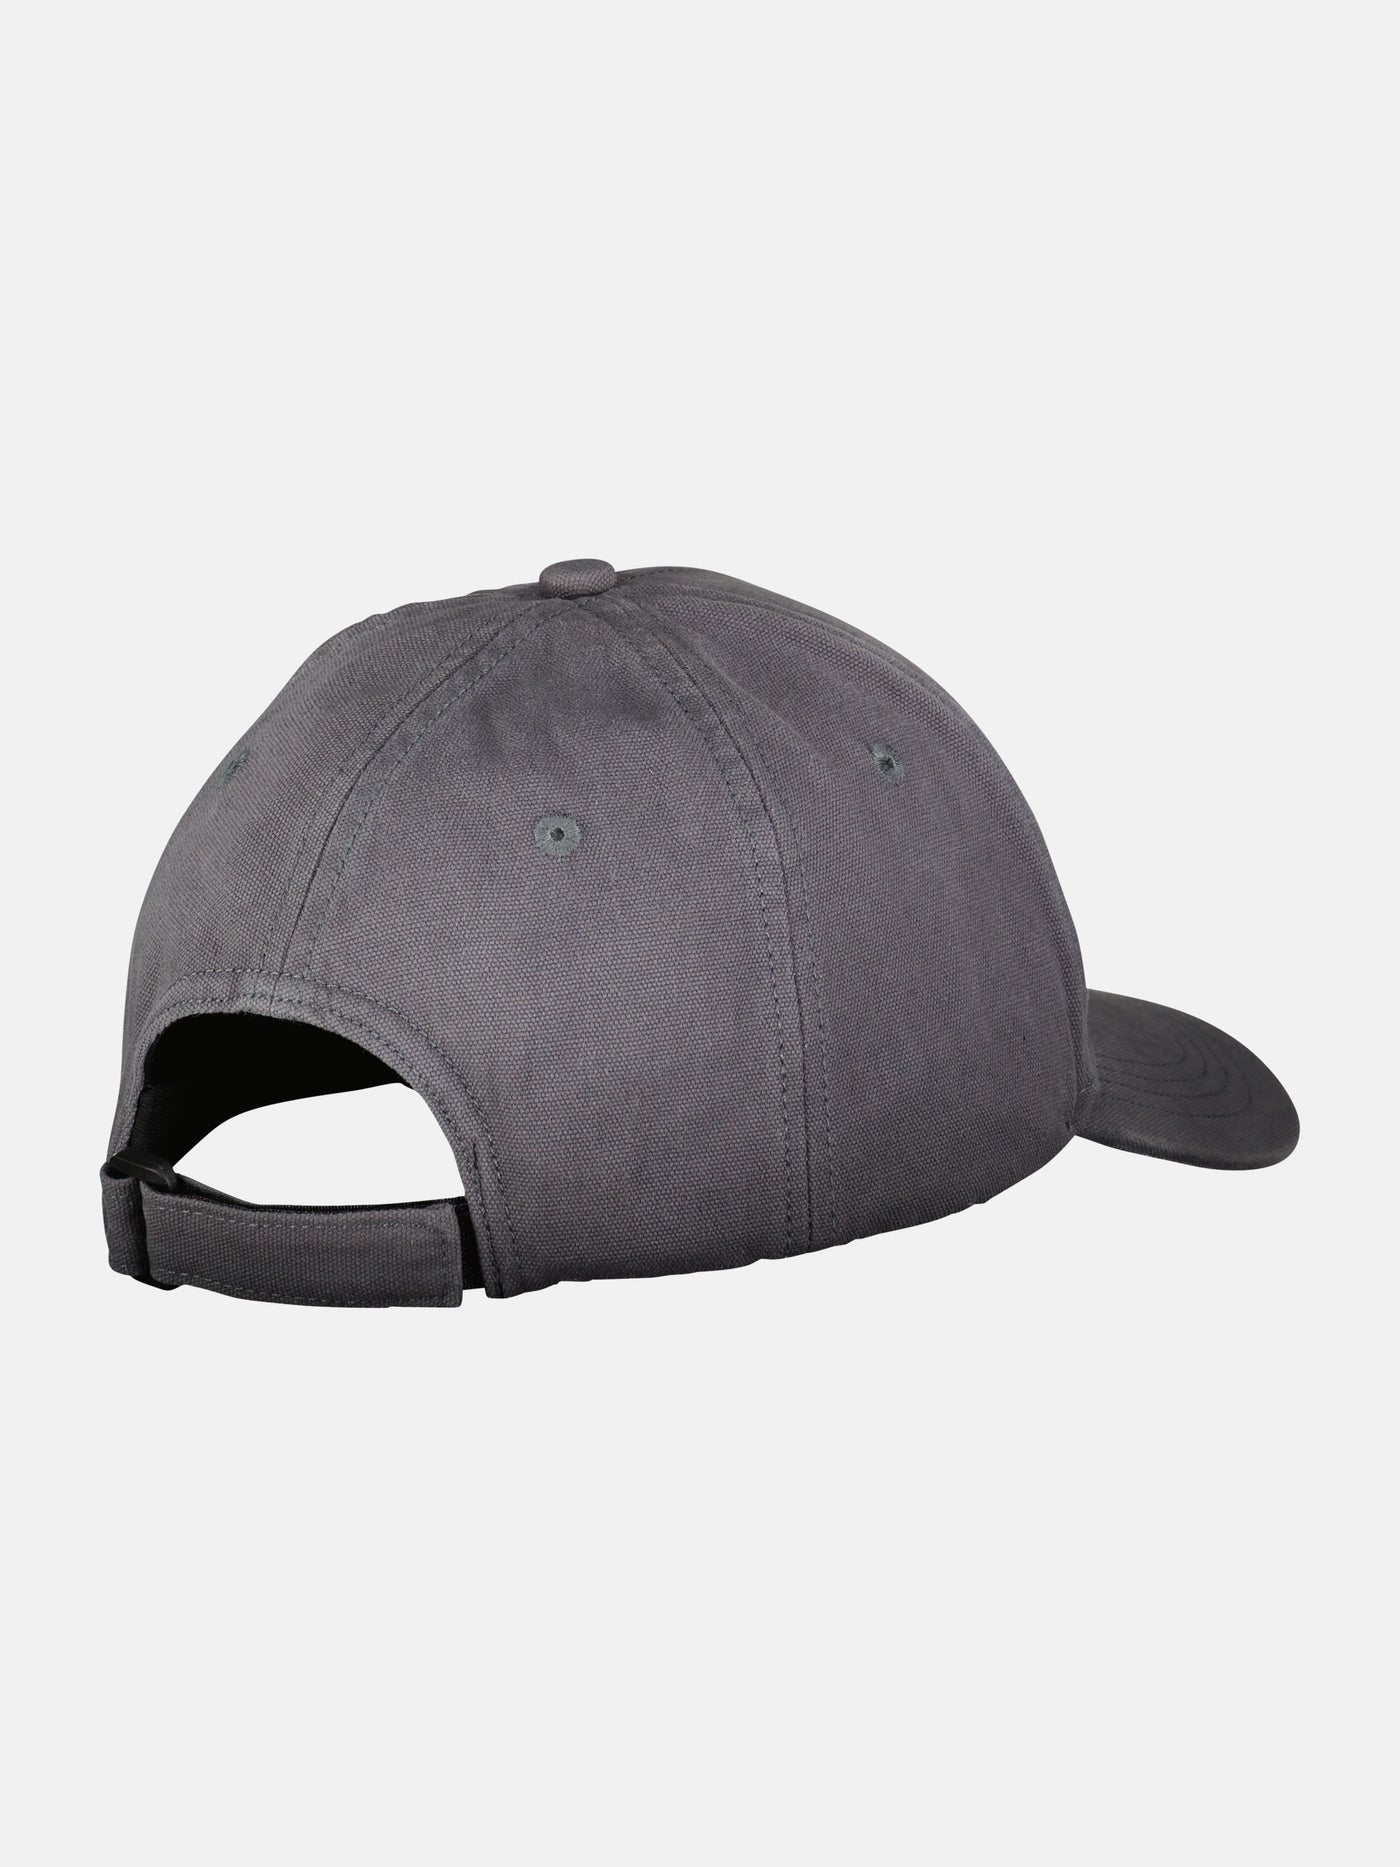 Plain-colored cap with logo